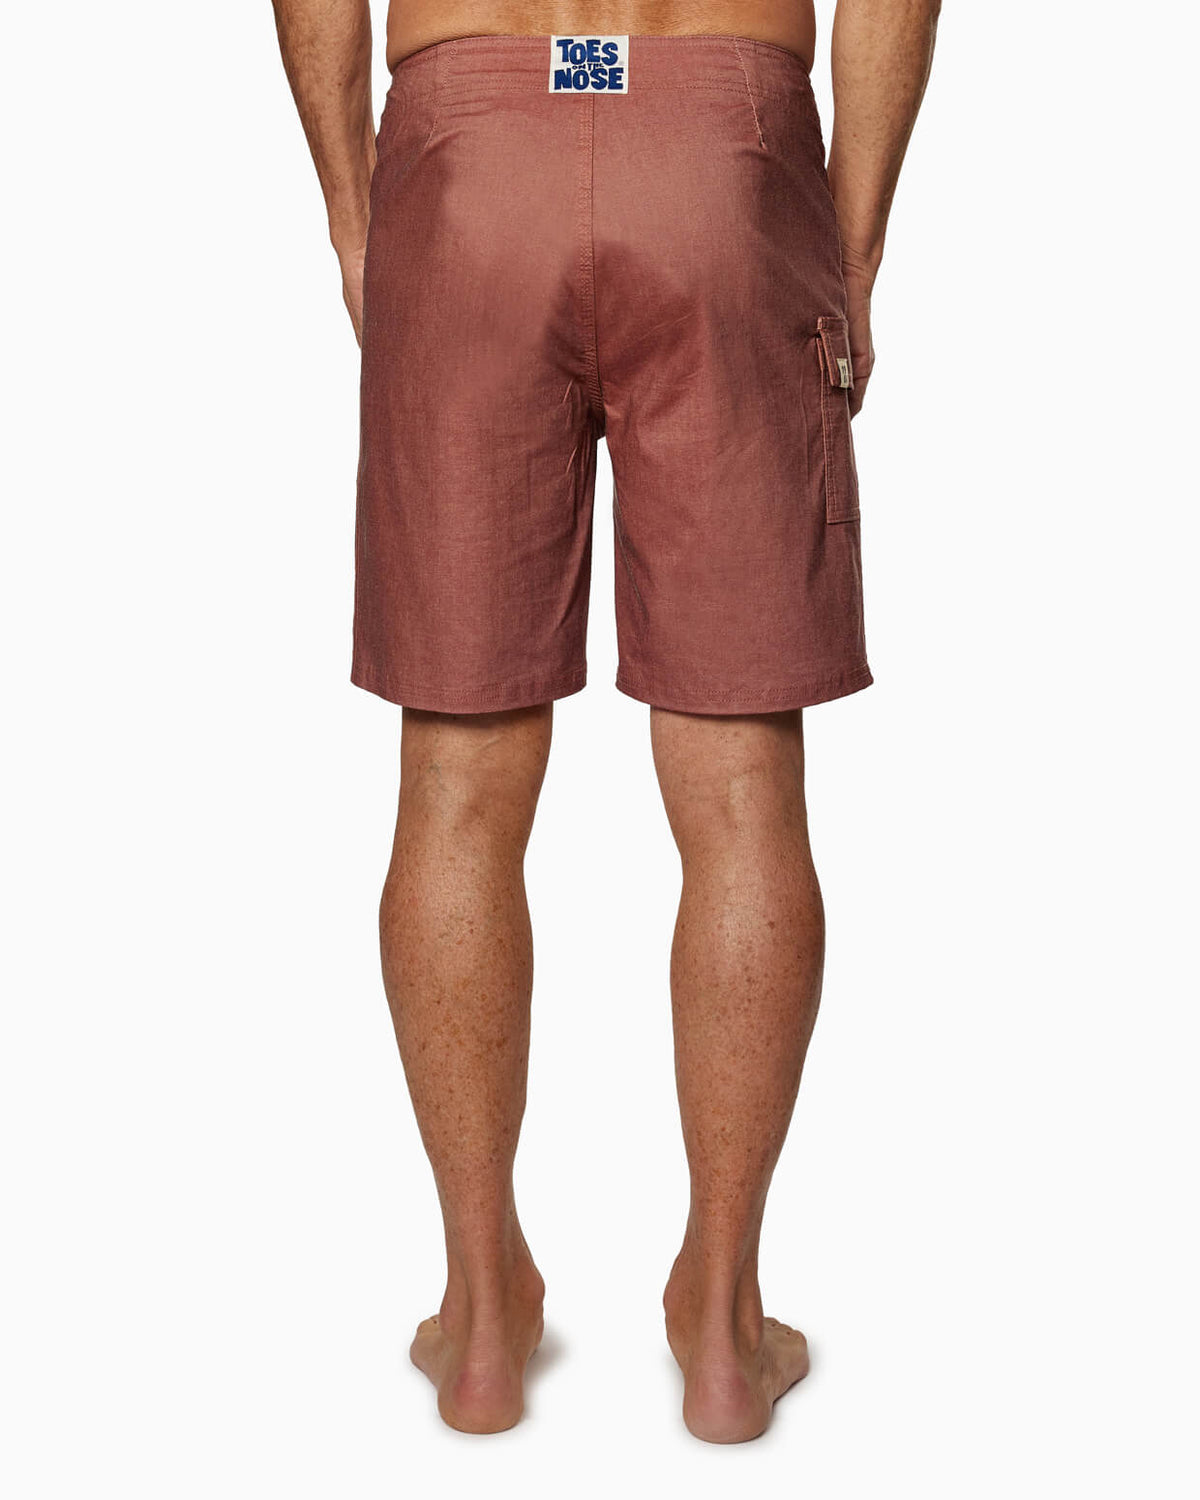 Session Boardshort | Sixty One Collection SESSION SPICE back #color_session spice